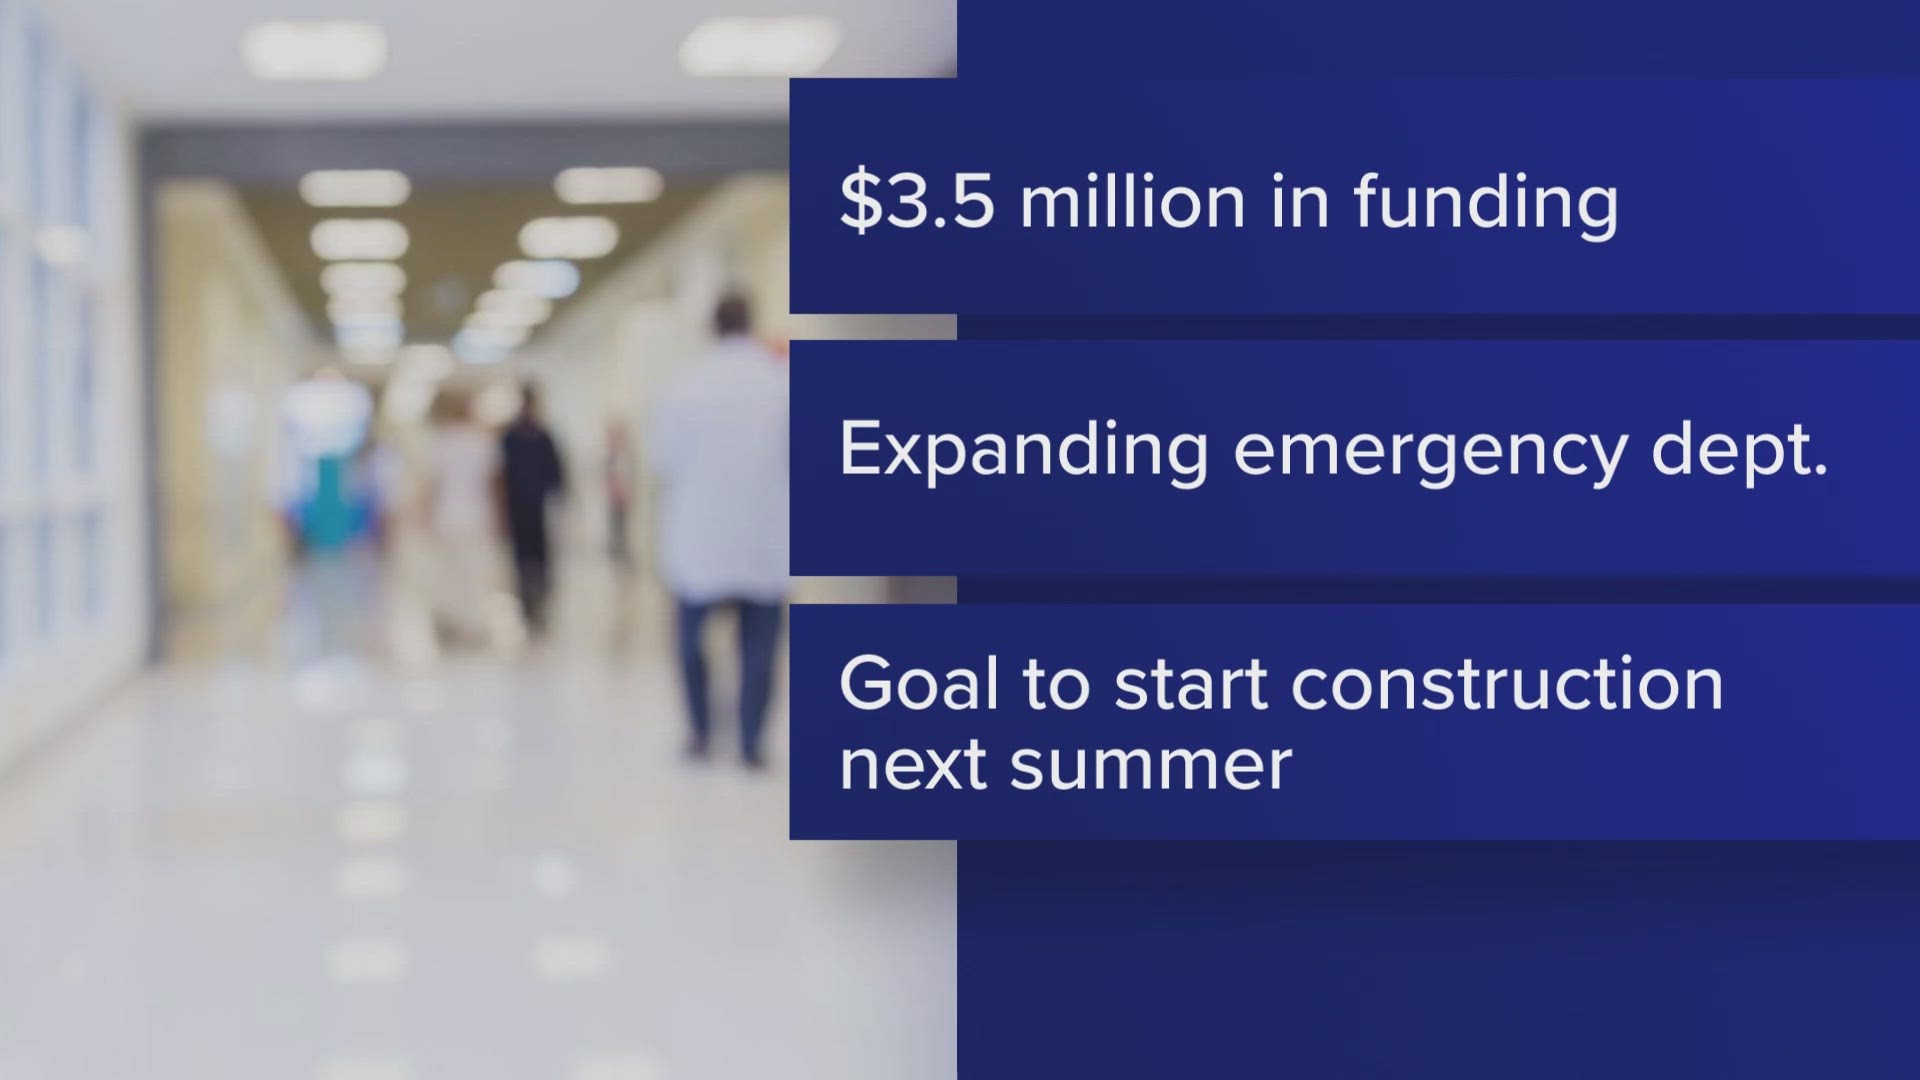 Construction on the new emergency department will start in 2024, officials say.